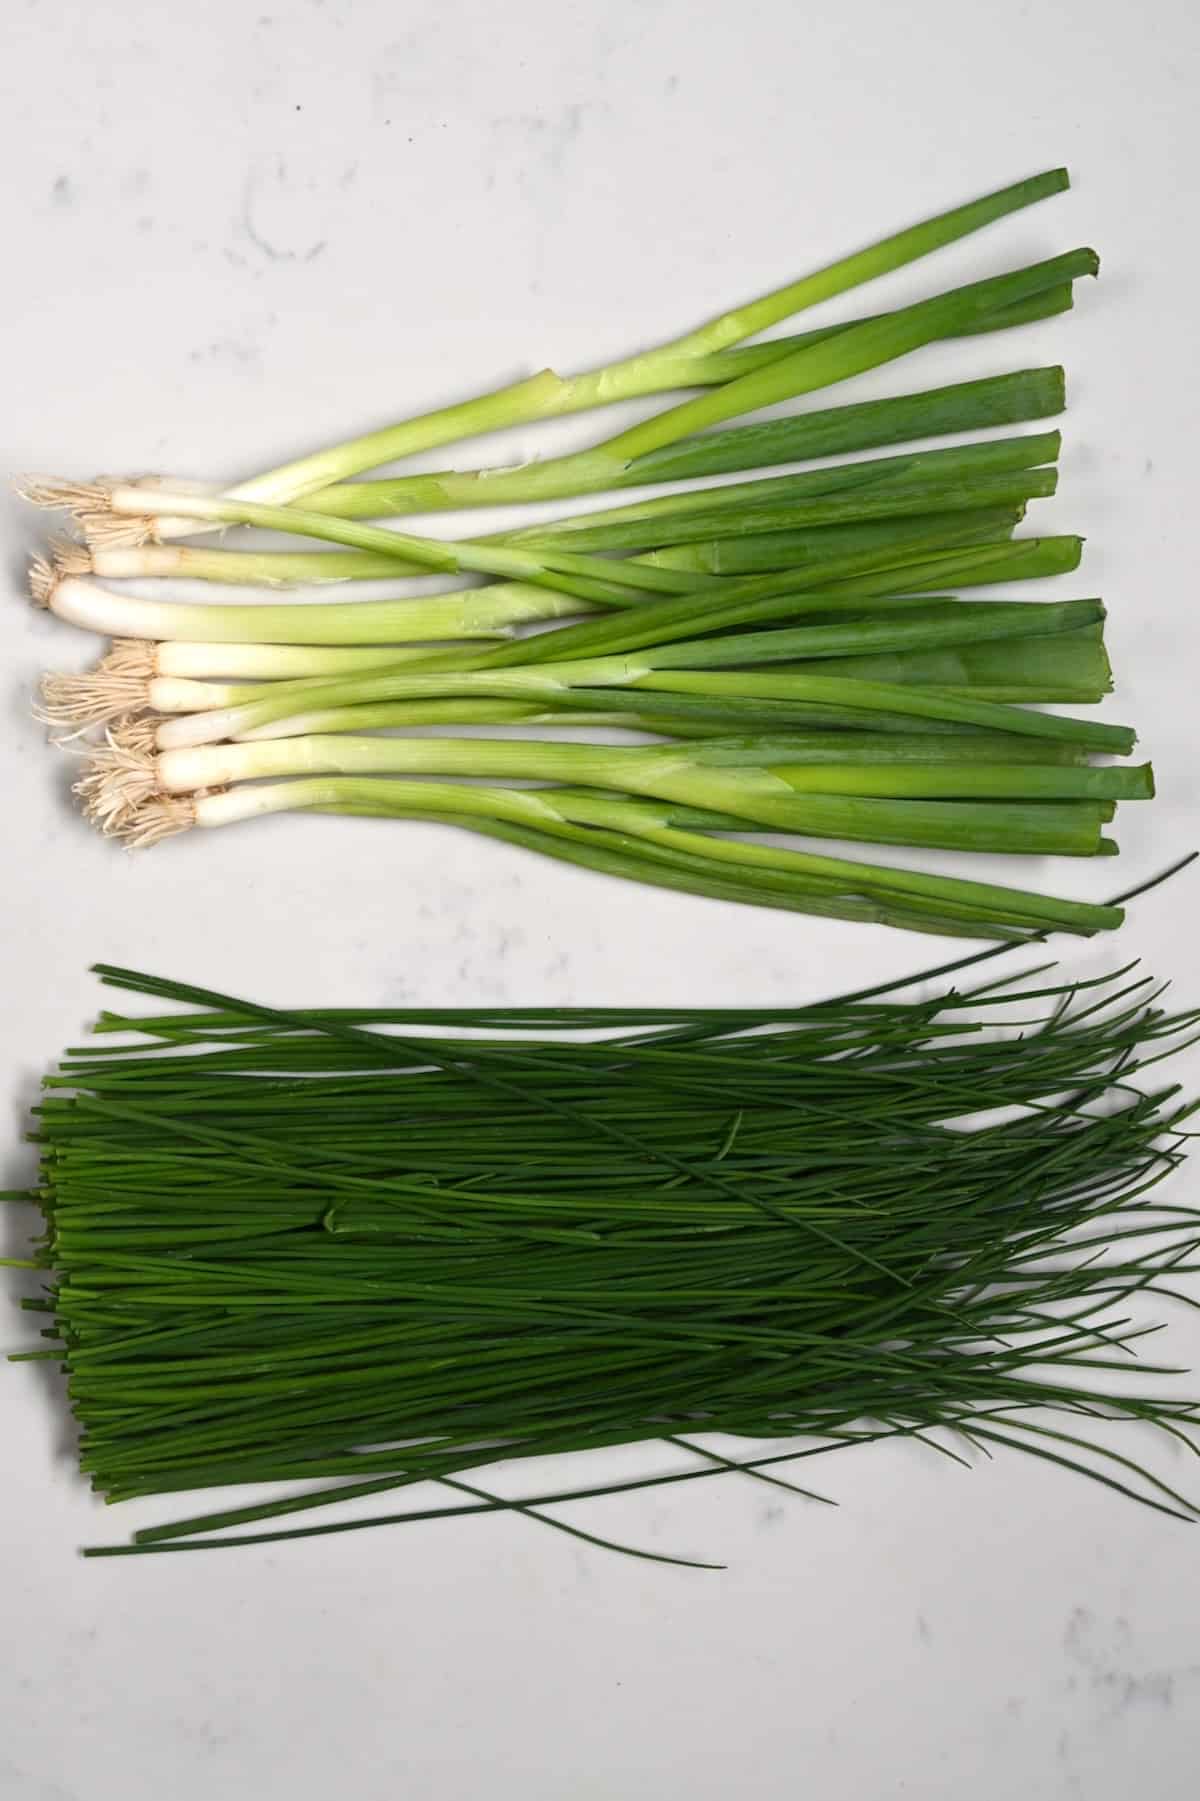 A bunch of green onions and chives on a flat surface